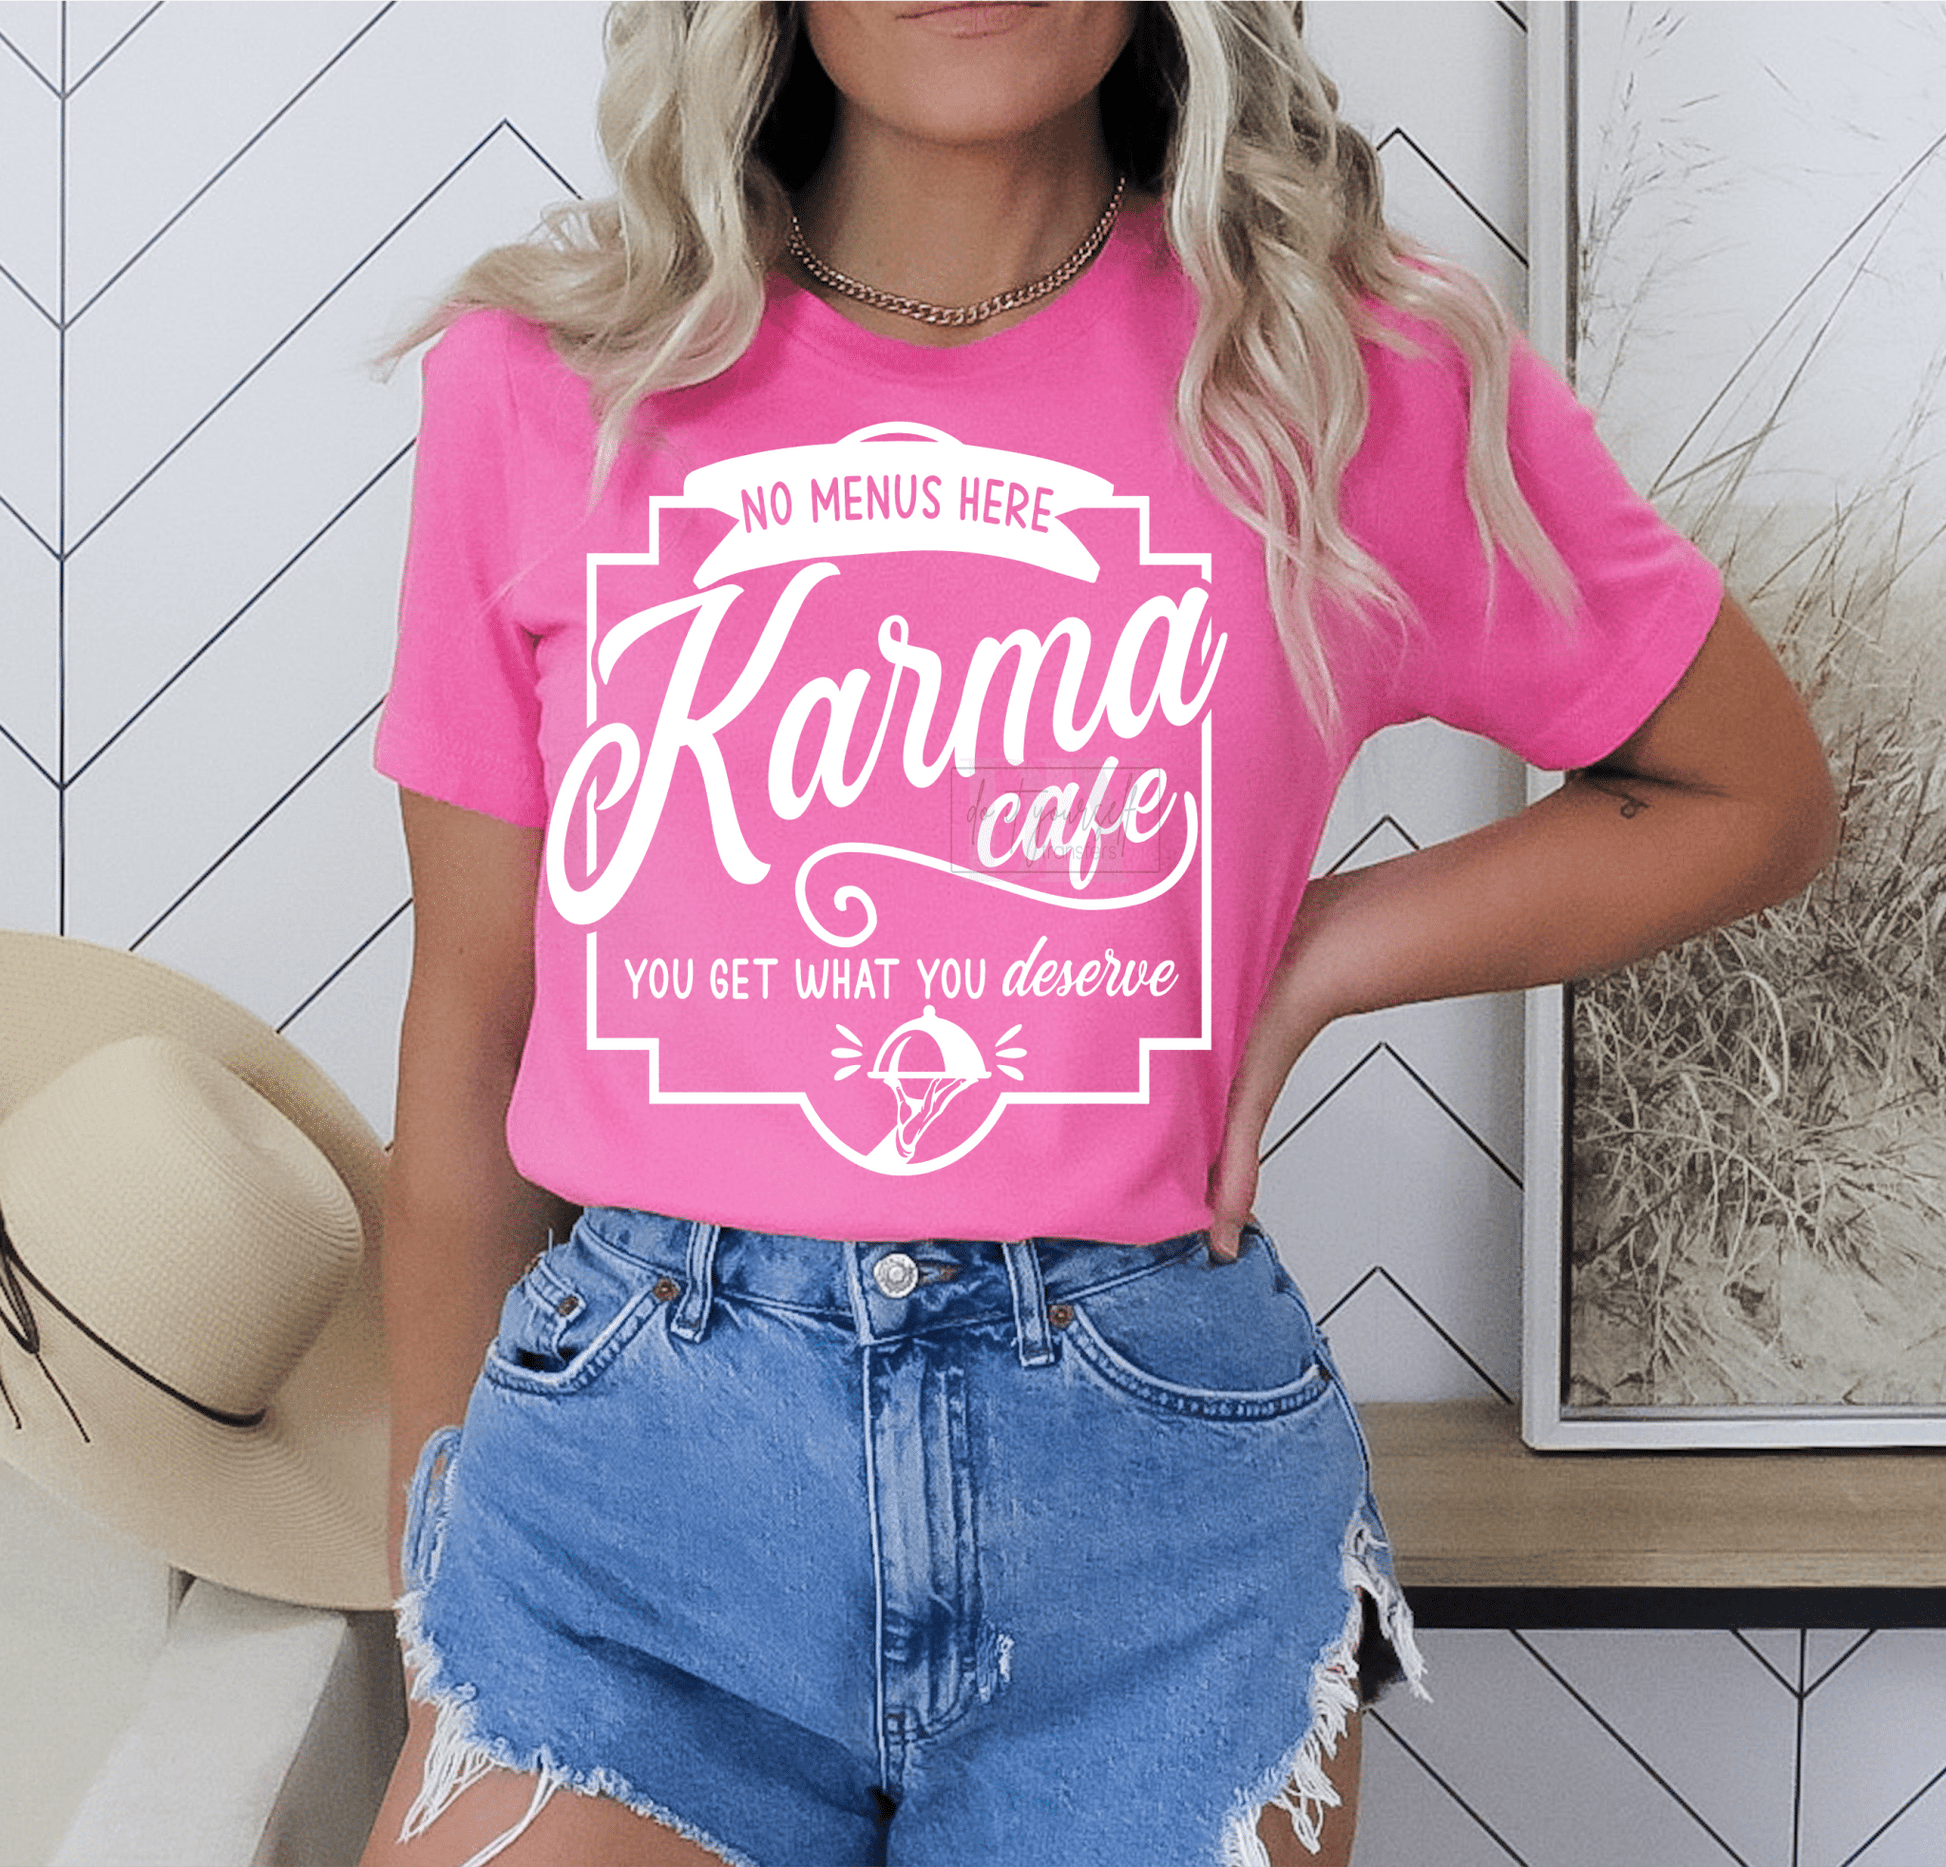 No menus here KARMA cafe you get what you deserve SINGLE COLOR WHITE size ADULT 10.5X12 DTF TRANSFERPRINT TO ORDER - Do it yourself Transfers